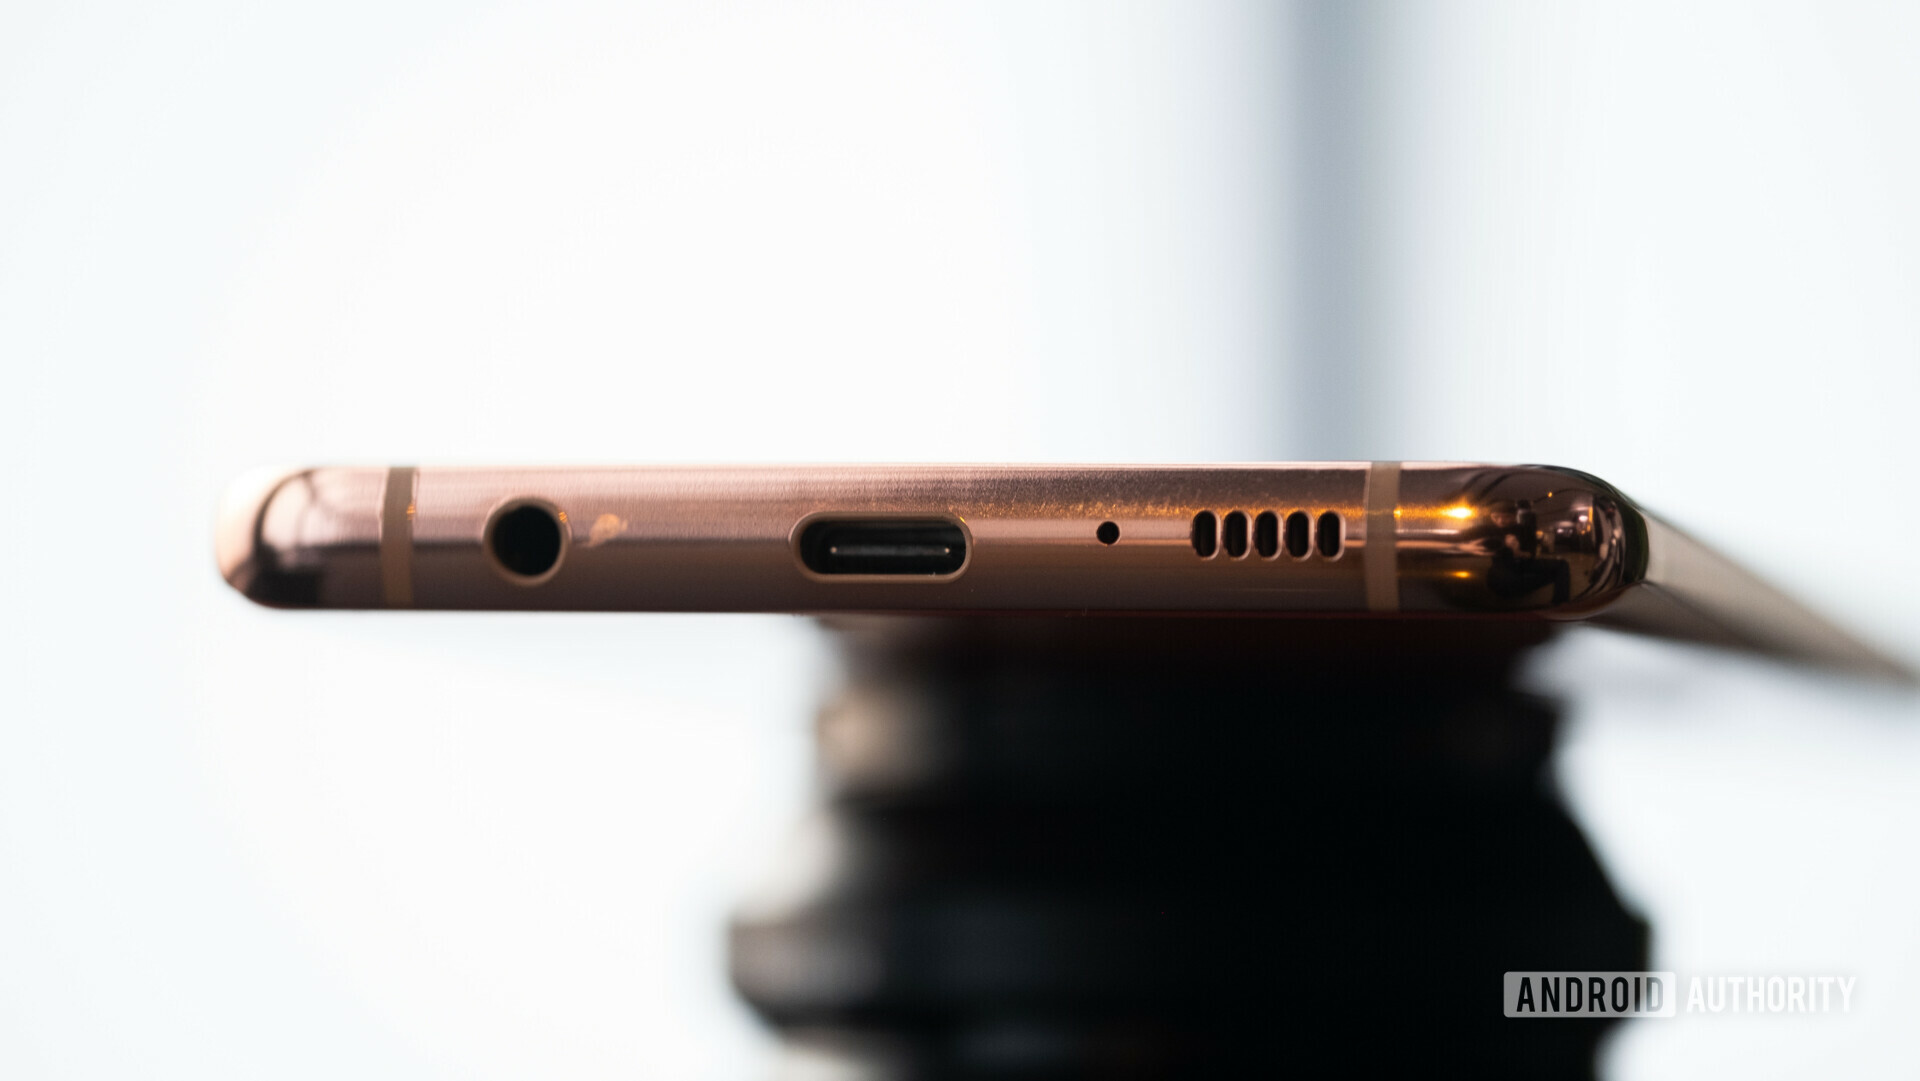 Bottom side photo of the new Samsung Galaxy S10 Plus 3.5mm audio jack and USB-C ports